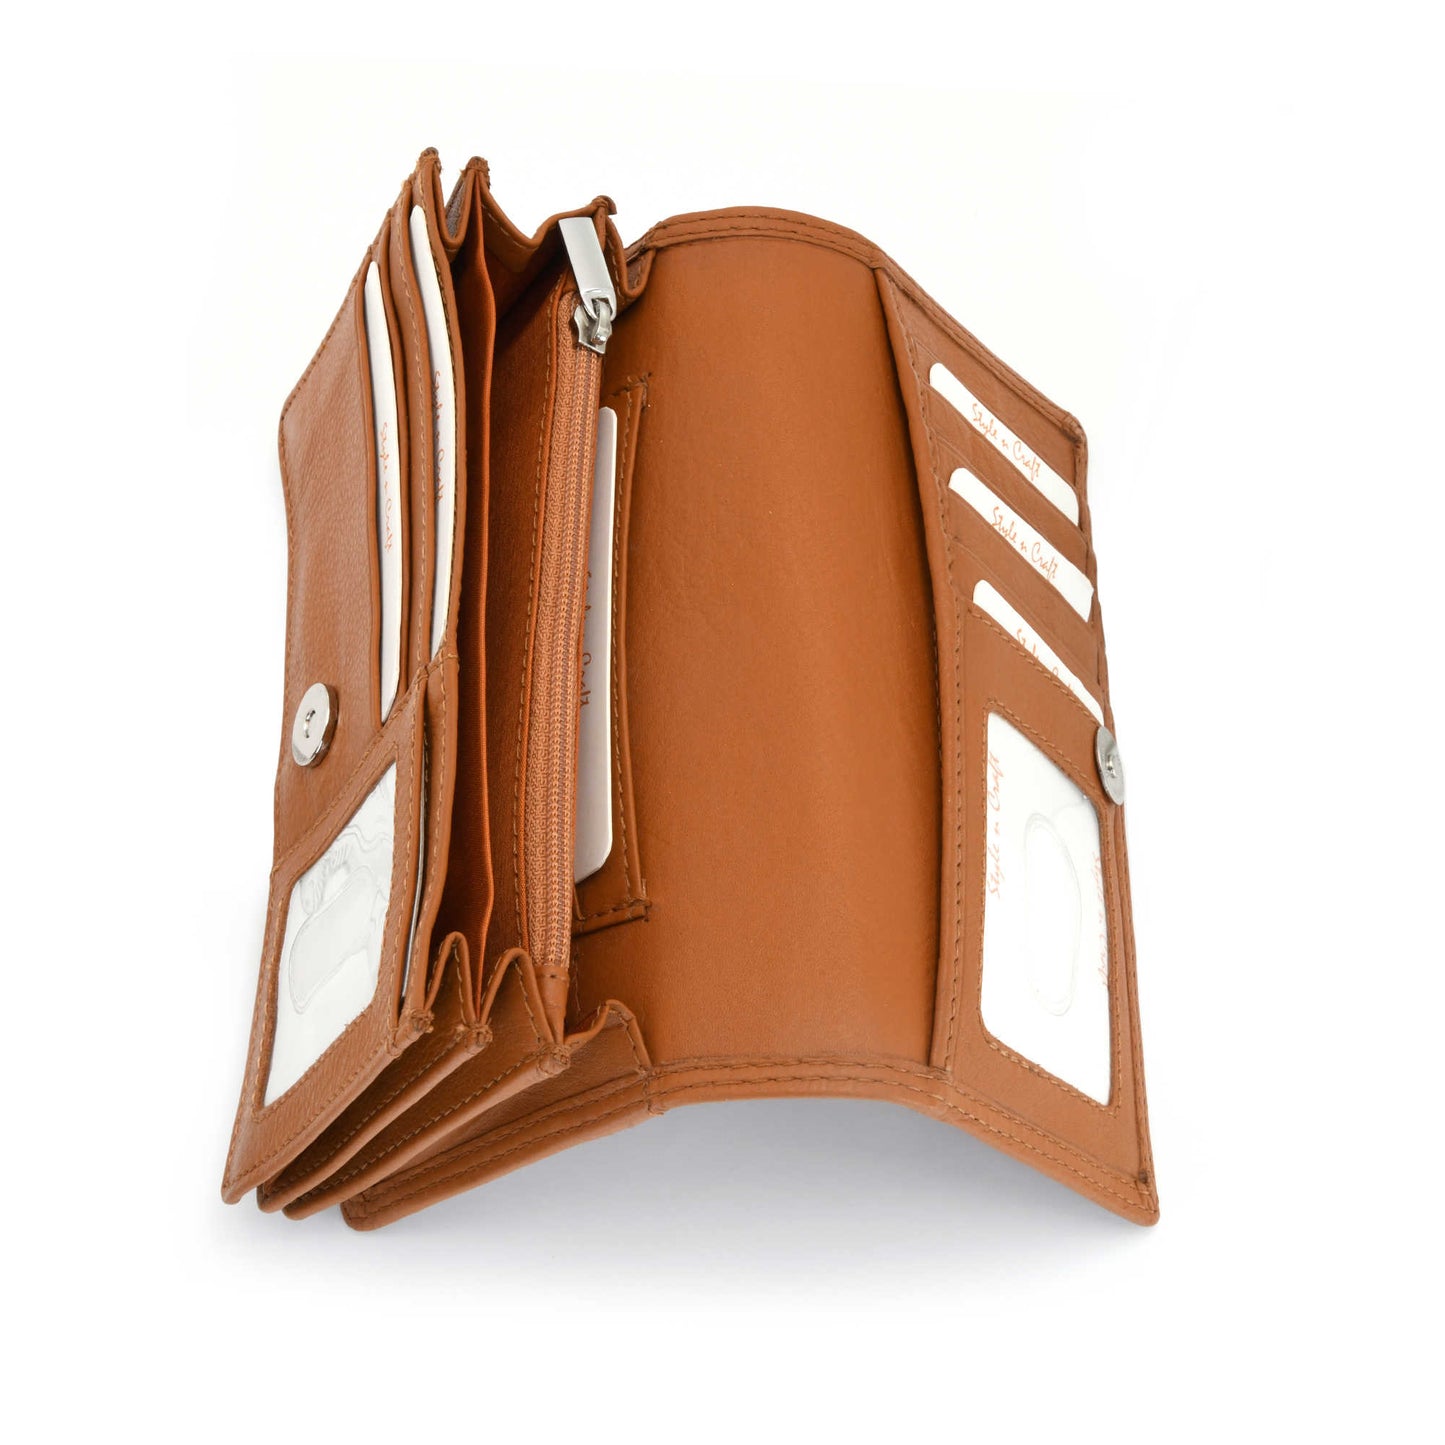 Style n Craft - 300956 Ladies Clutch Wallet in Leather - tan color - open view showing interior pockets